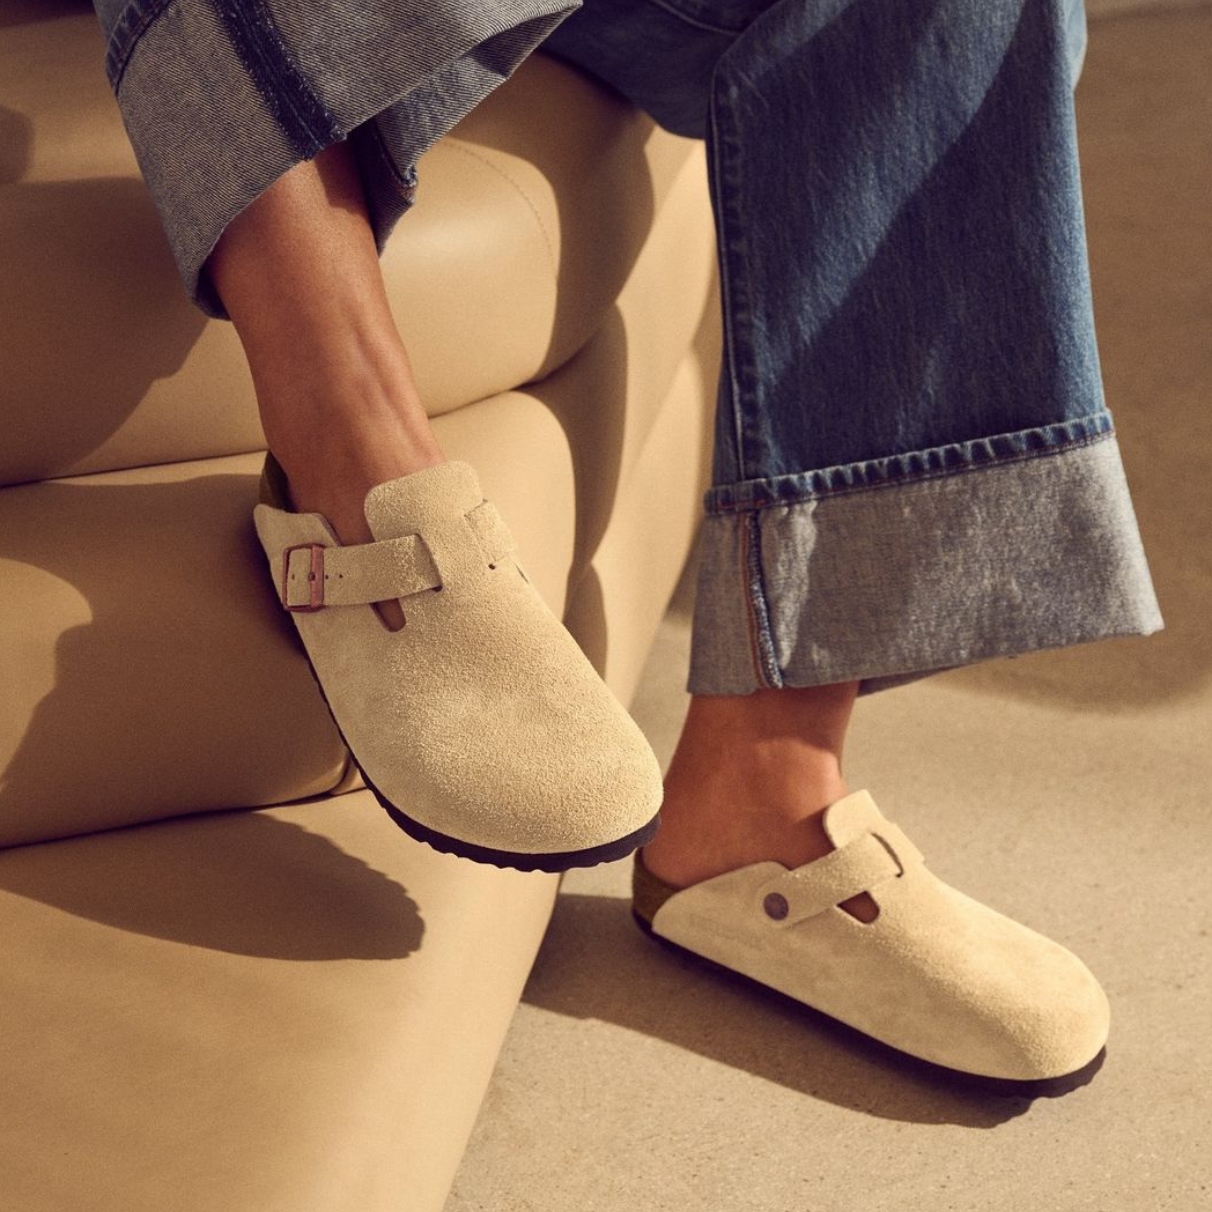 Make This Summer Your Most Comfortable Yet: Try Birkenstocks!